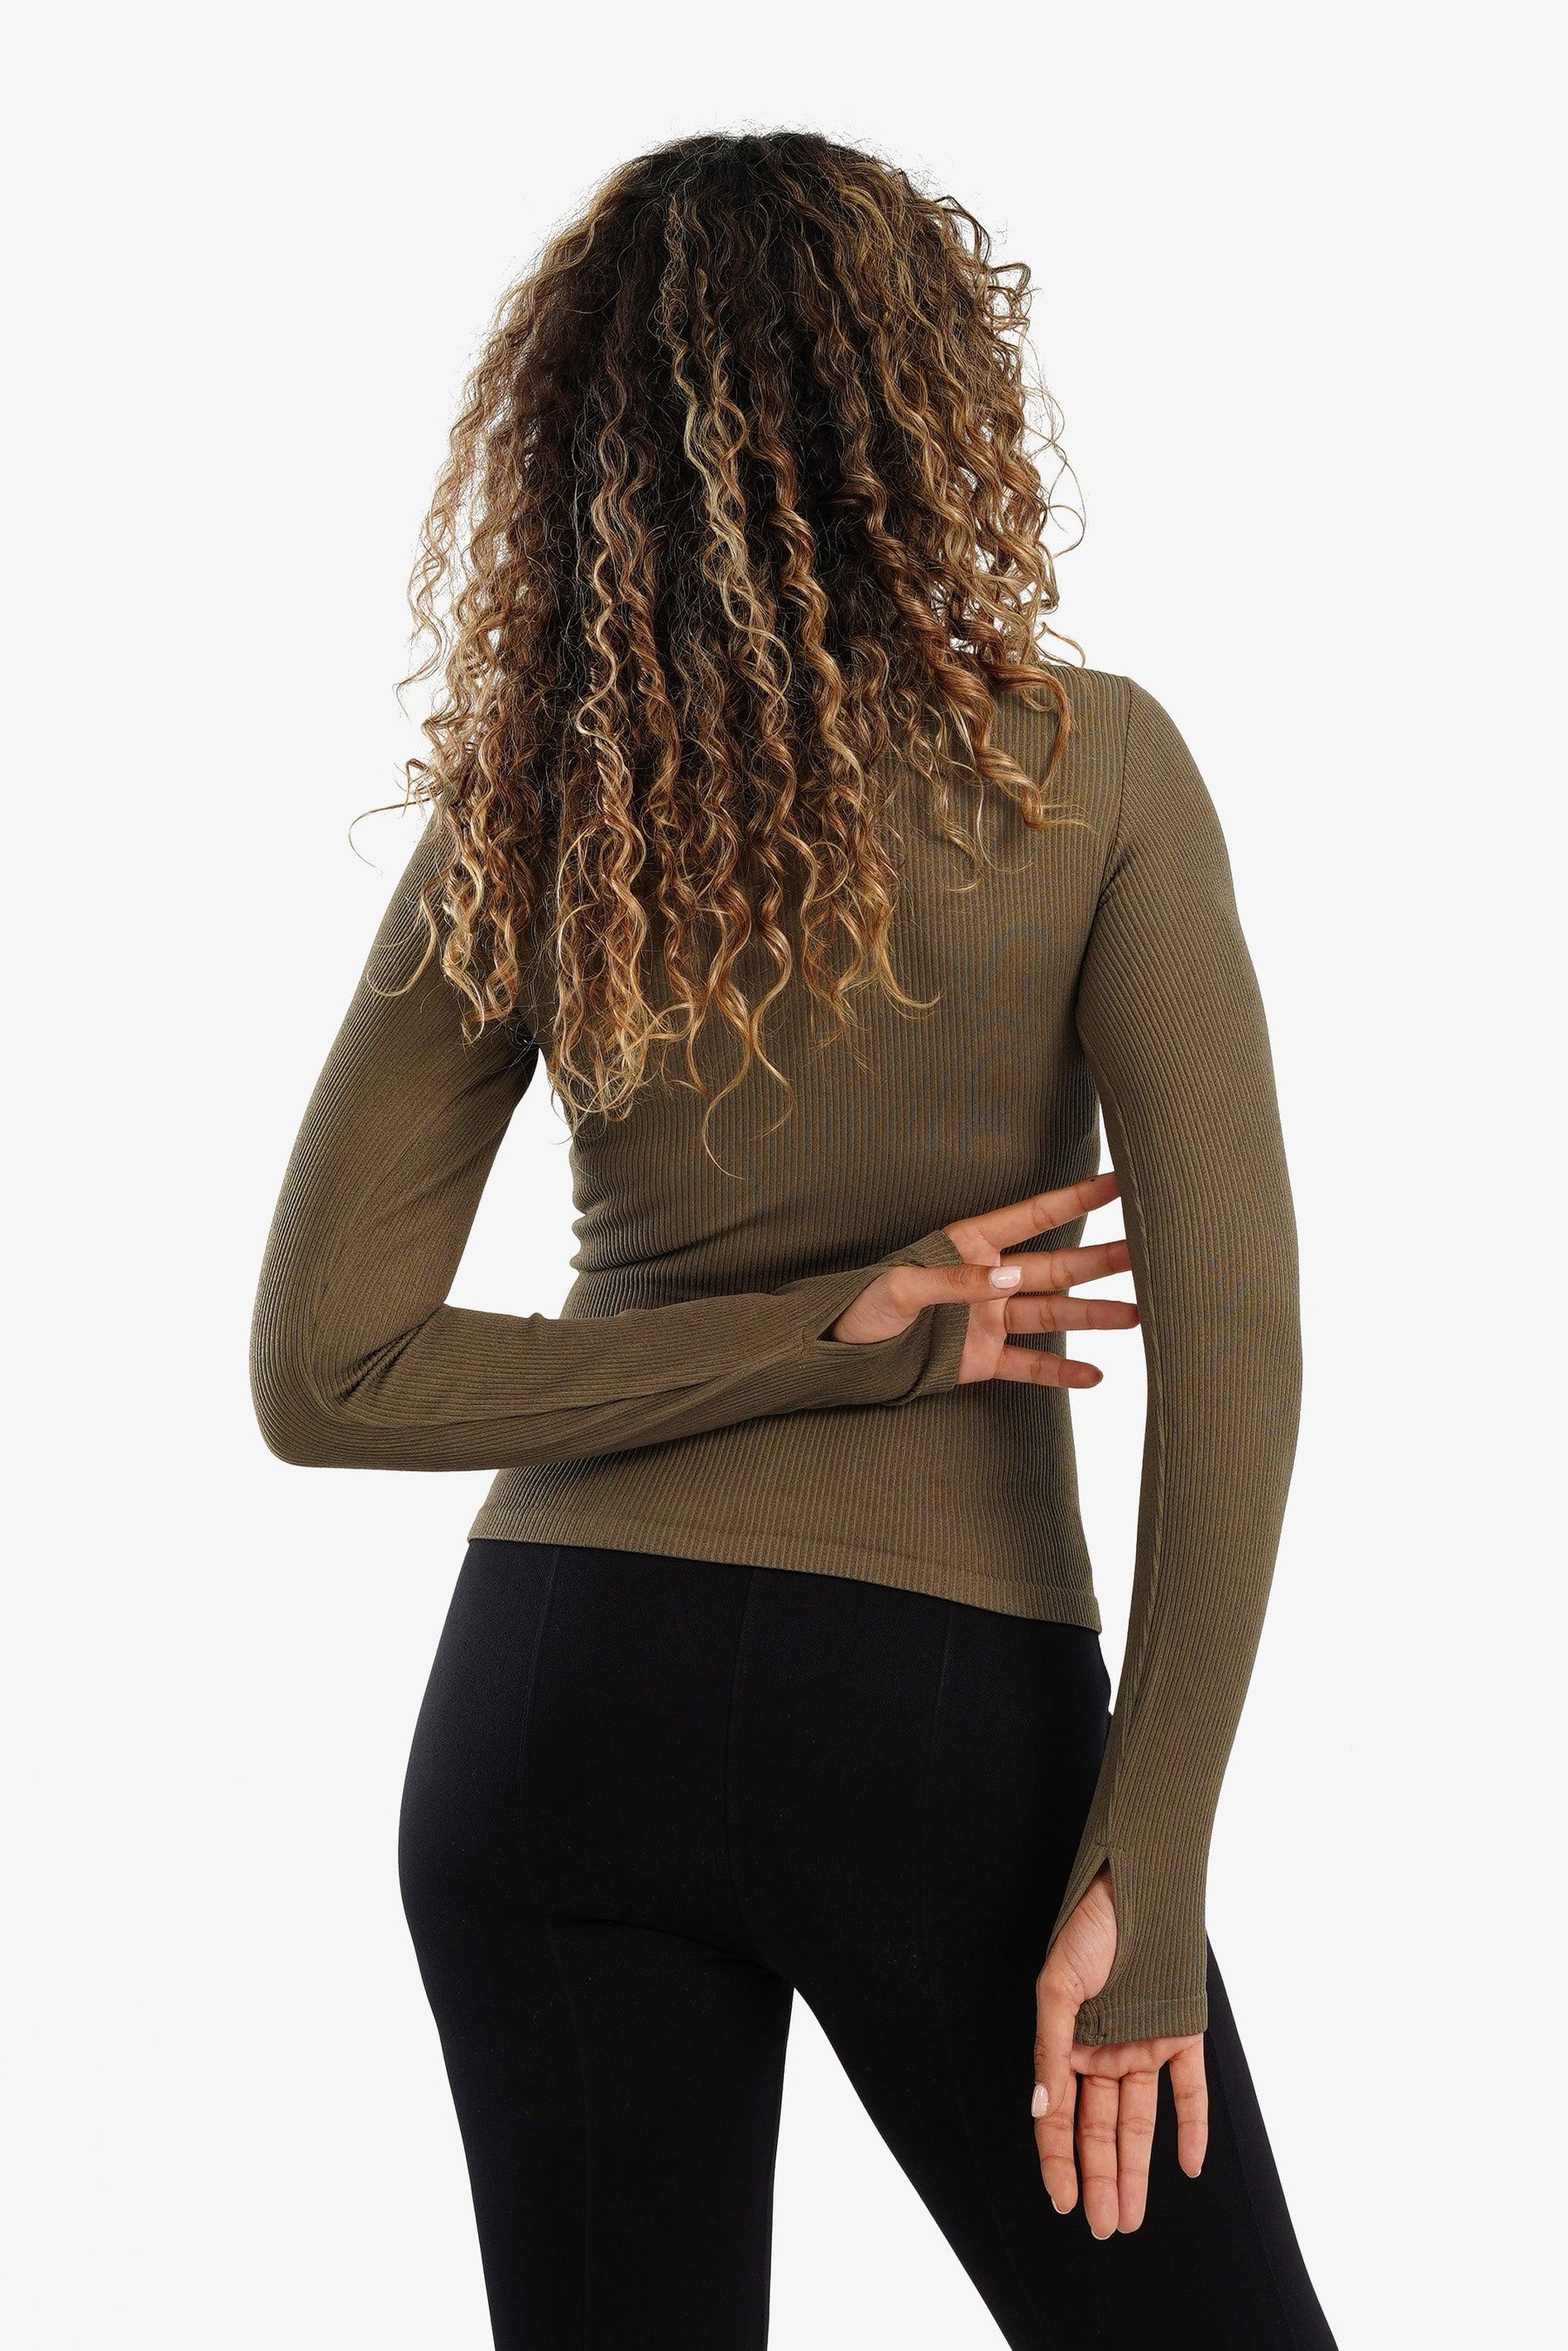 Top with Thumbhole cuffs - Carina - كارينا